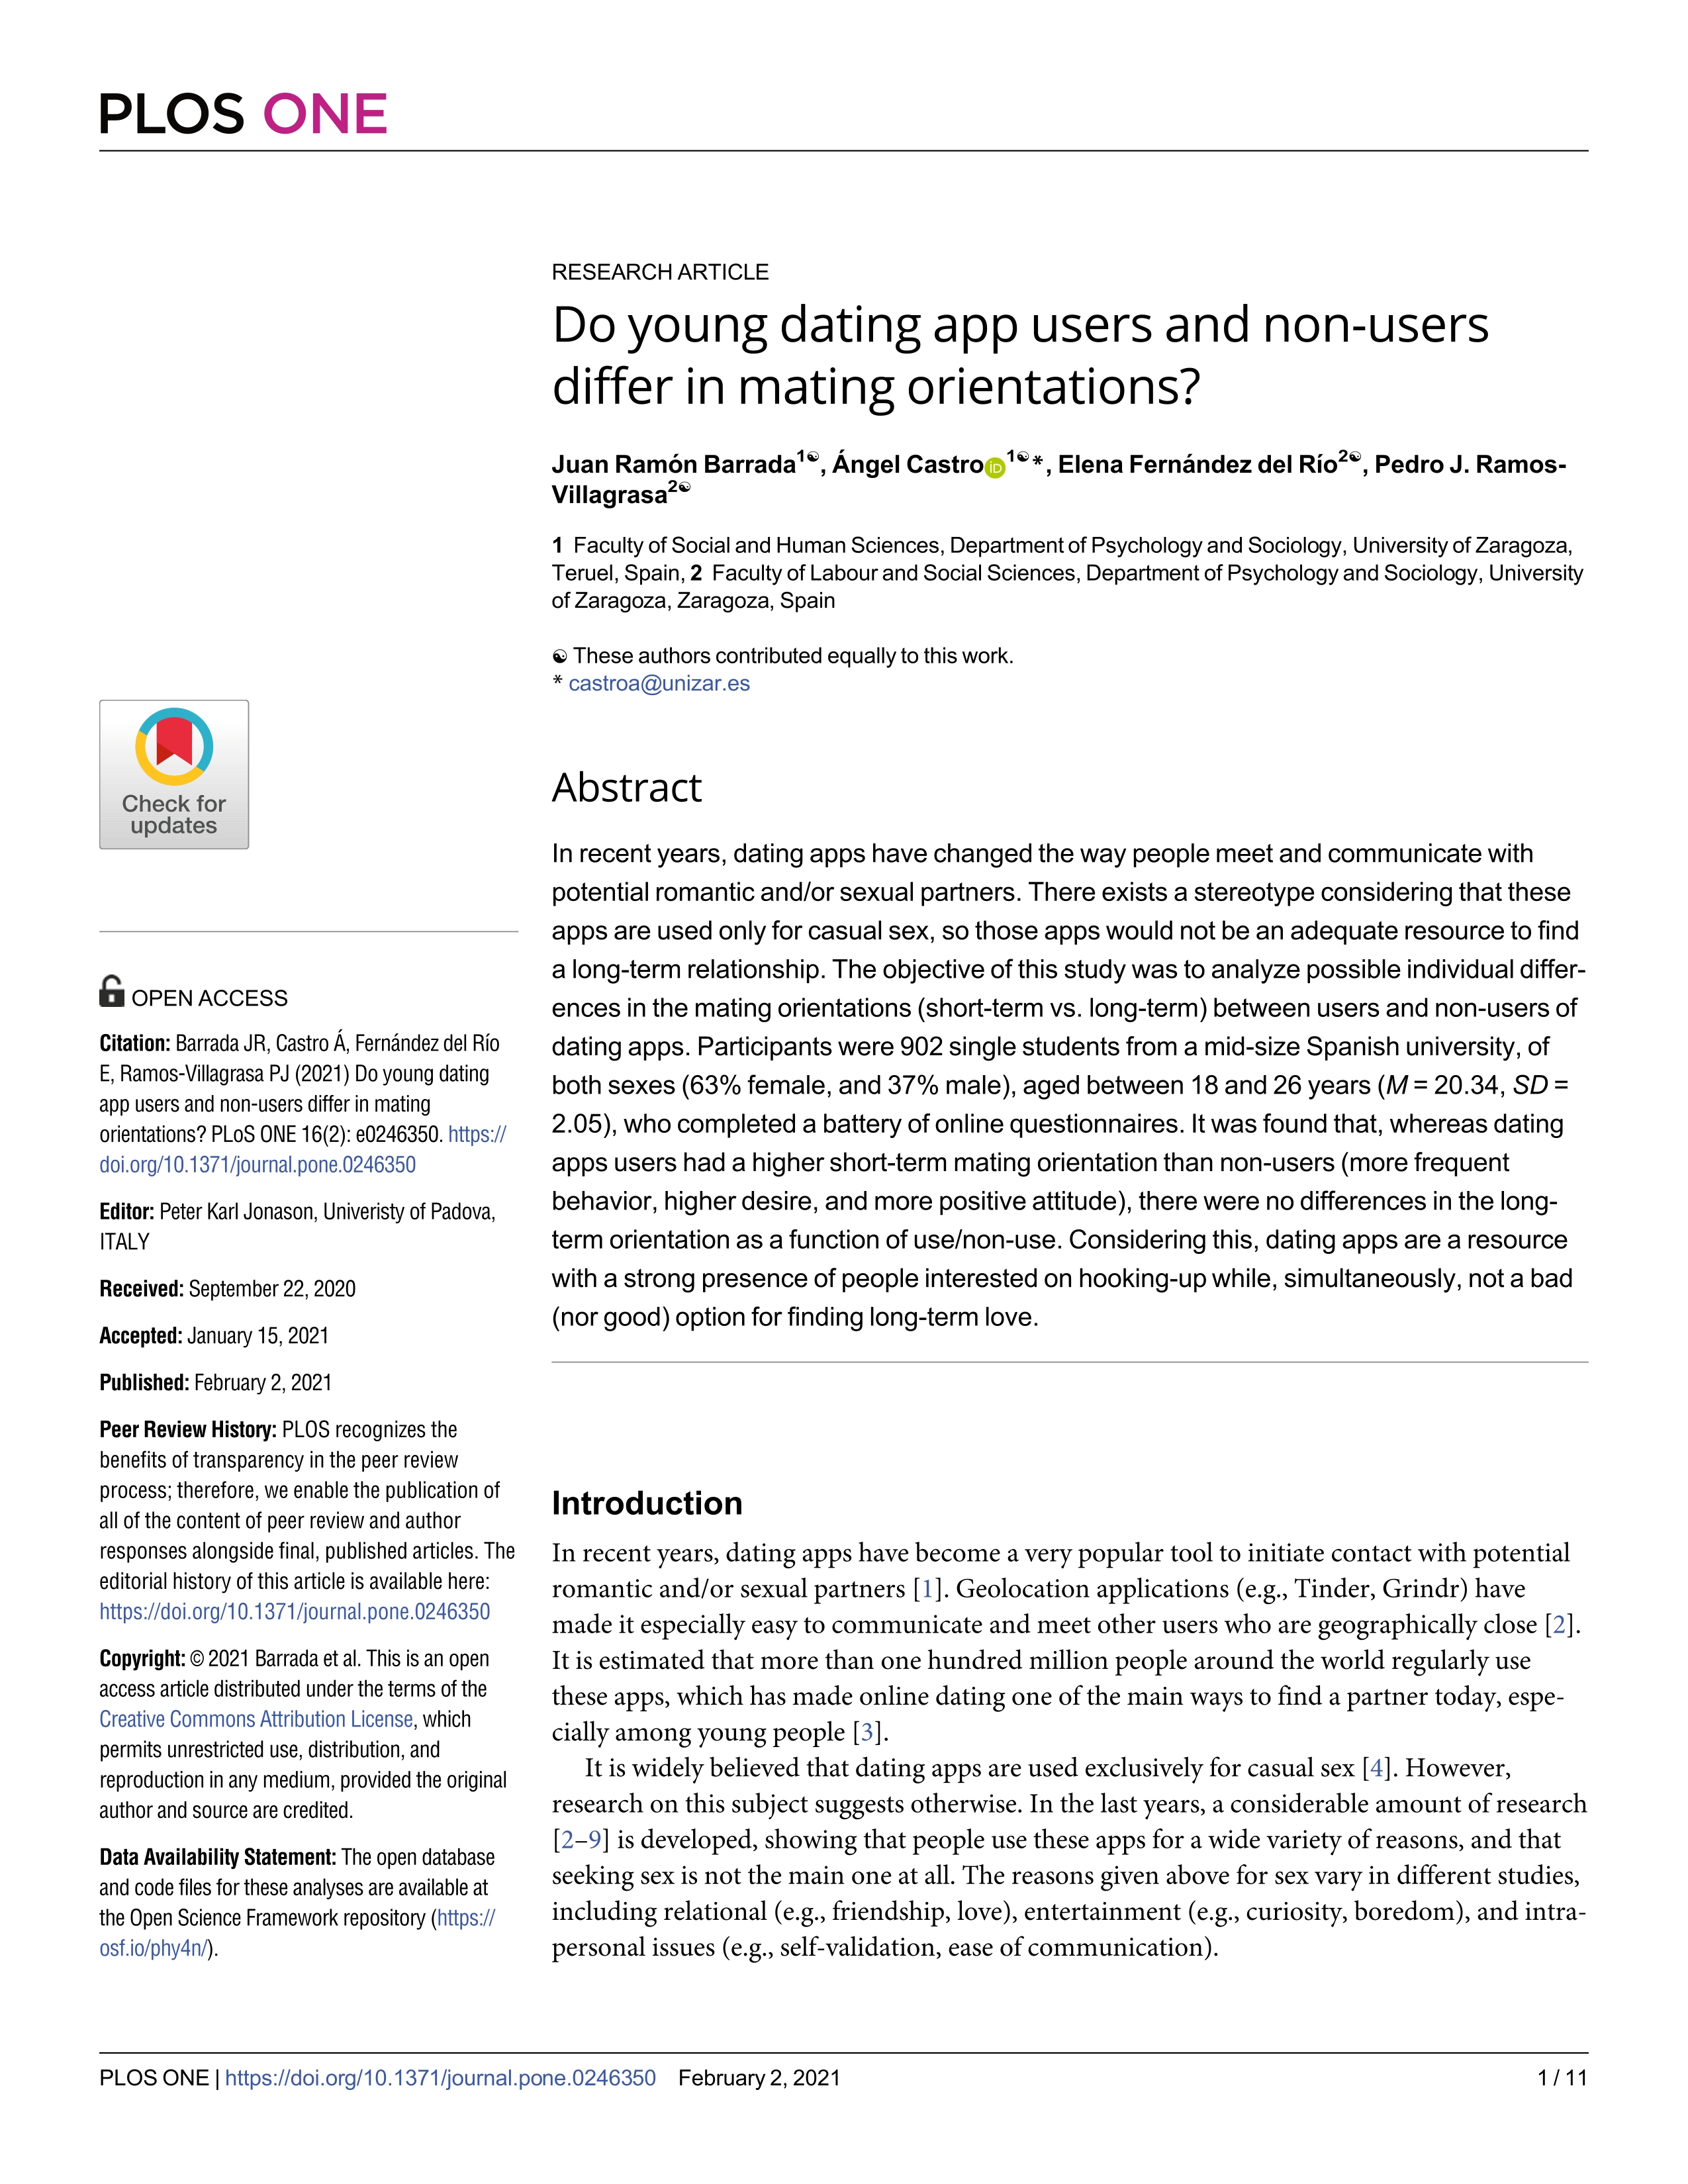 Do young dating app users and non-users differ in mating orientations?